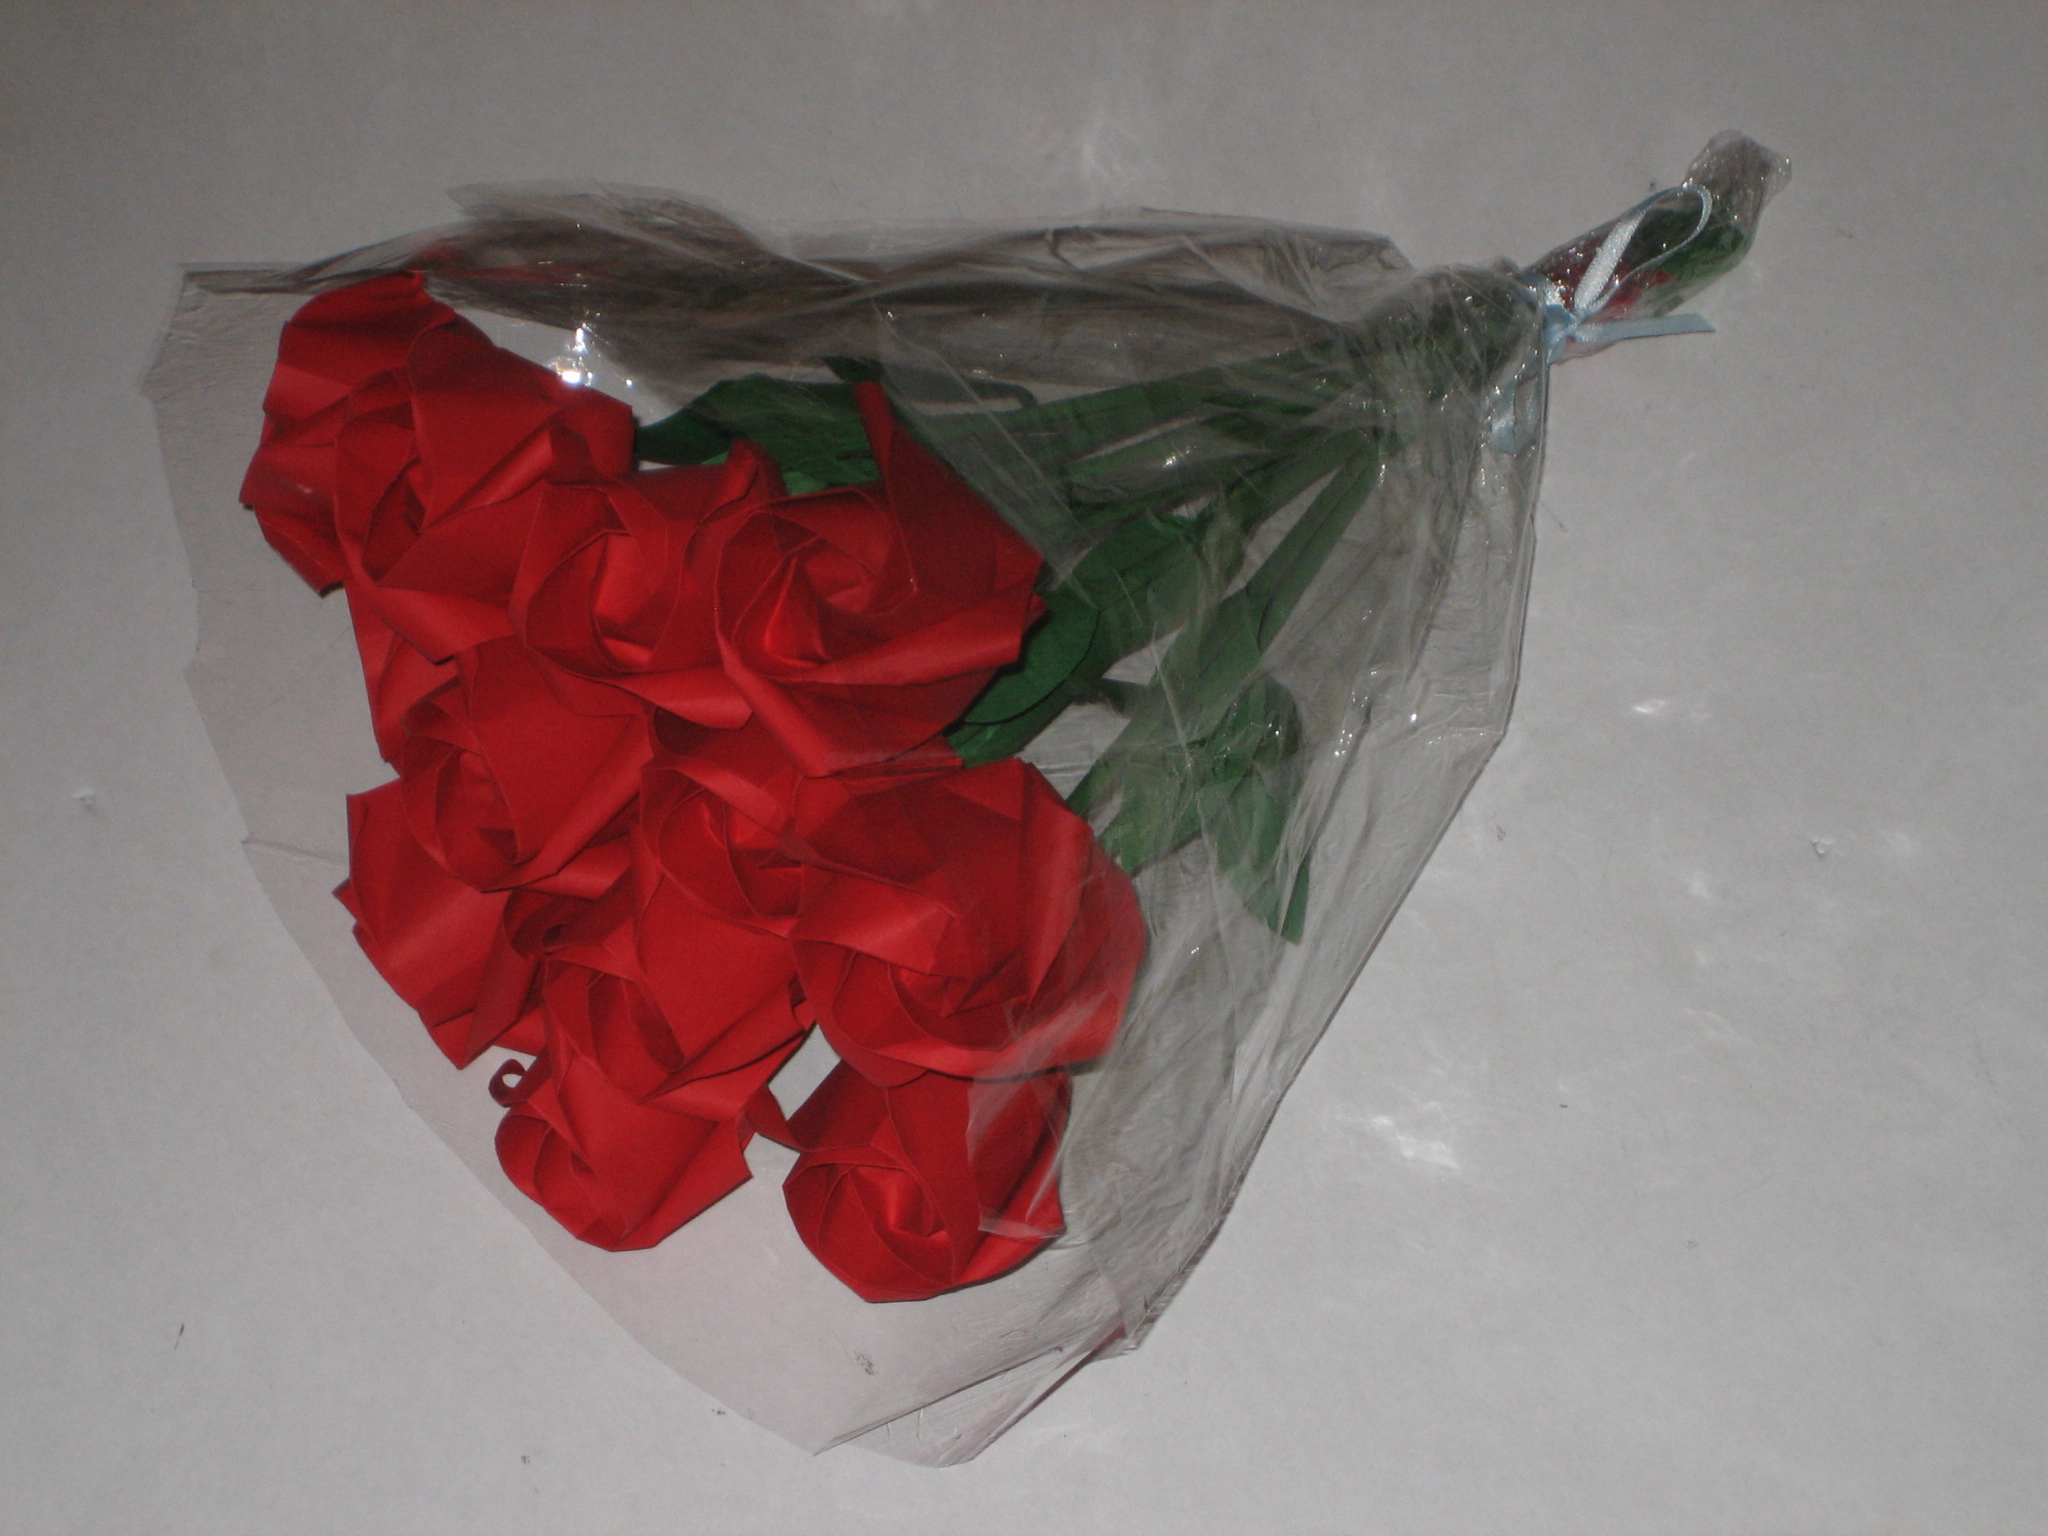 How To Do Origami Rose A Dozen Red Origami Roses 6 Steps With Pictures